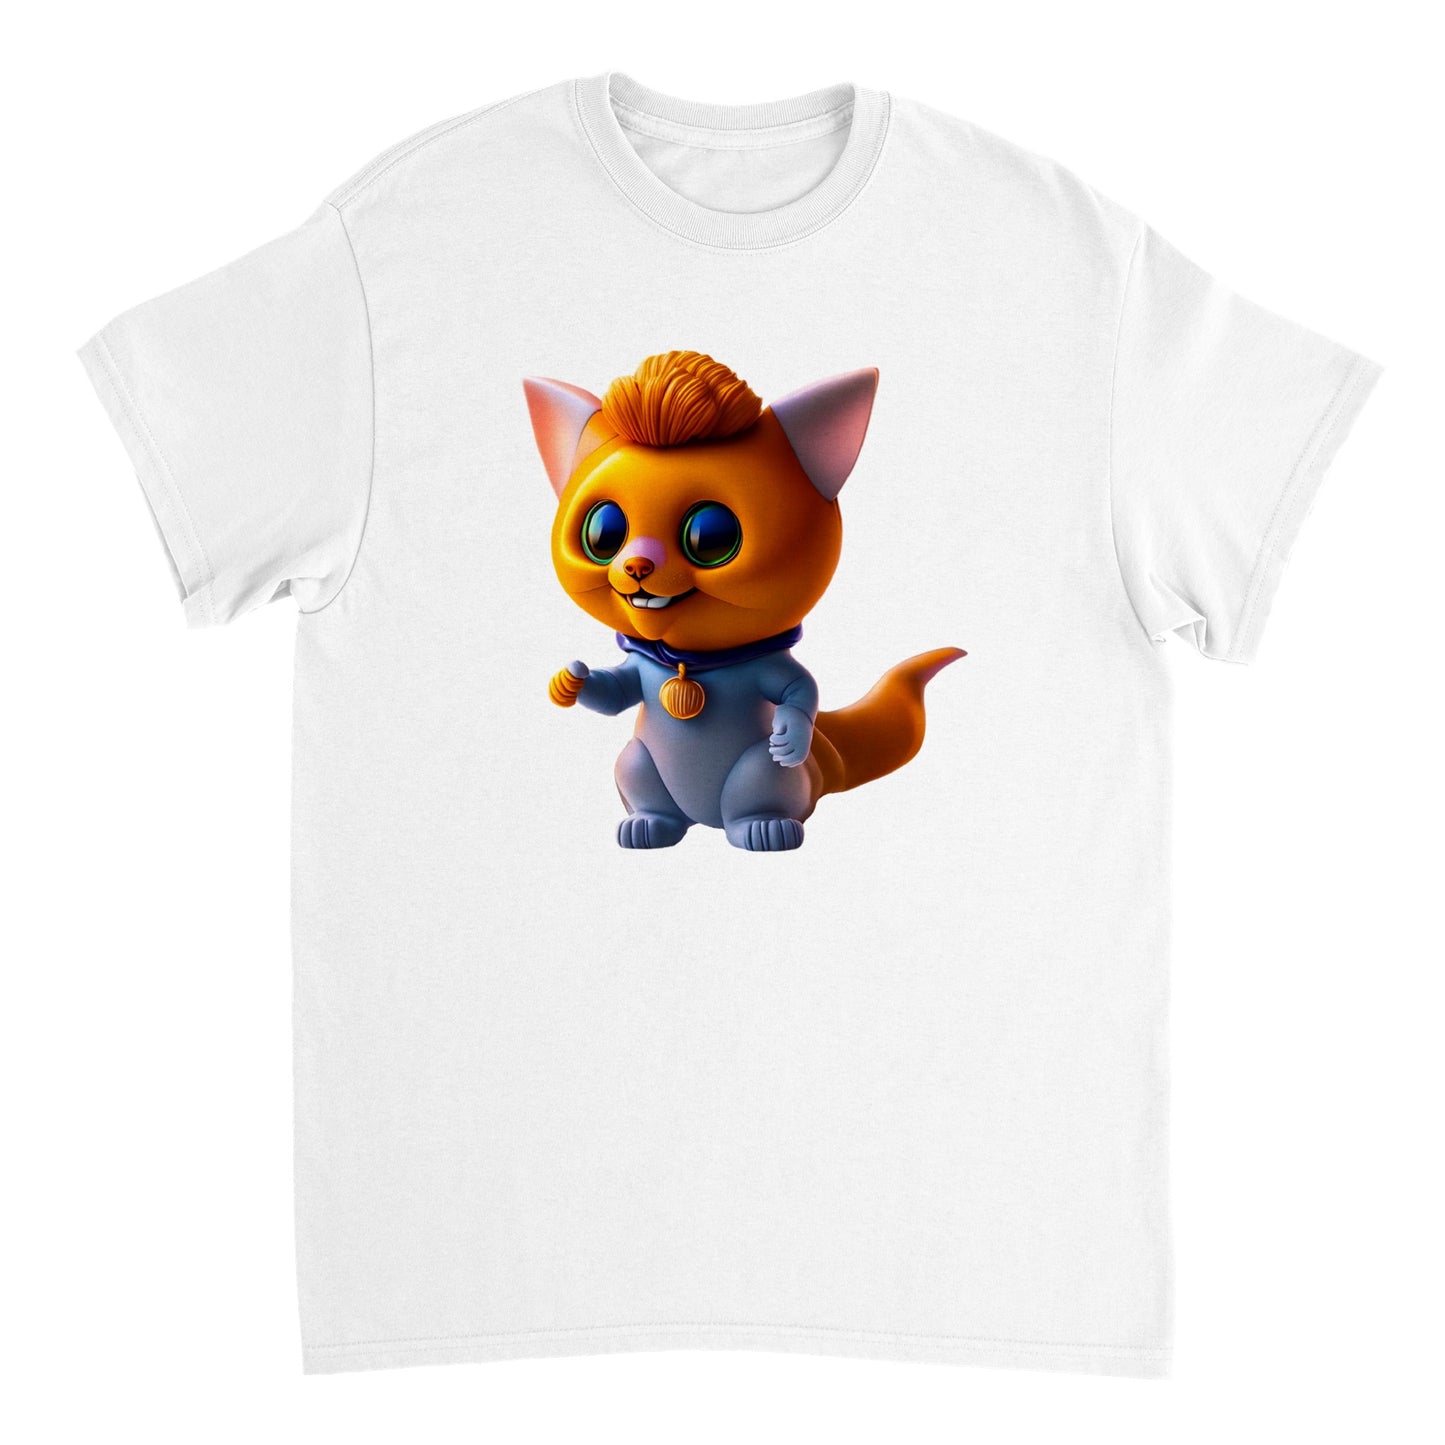 Adorable, Cool, Cute Cats and Kittens Toy - Heavyweight Unisex Crewneck T-shirt 61